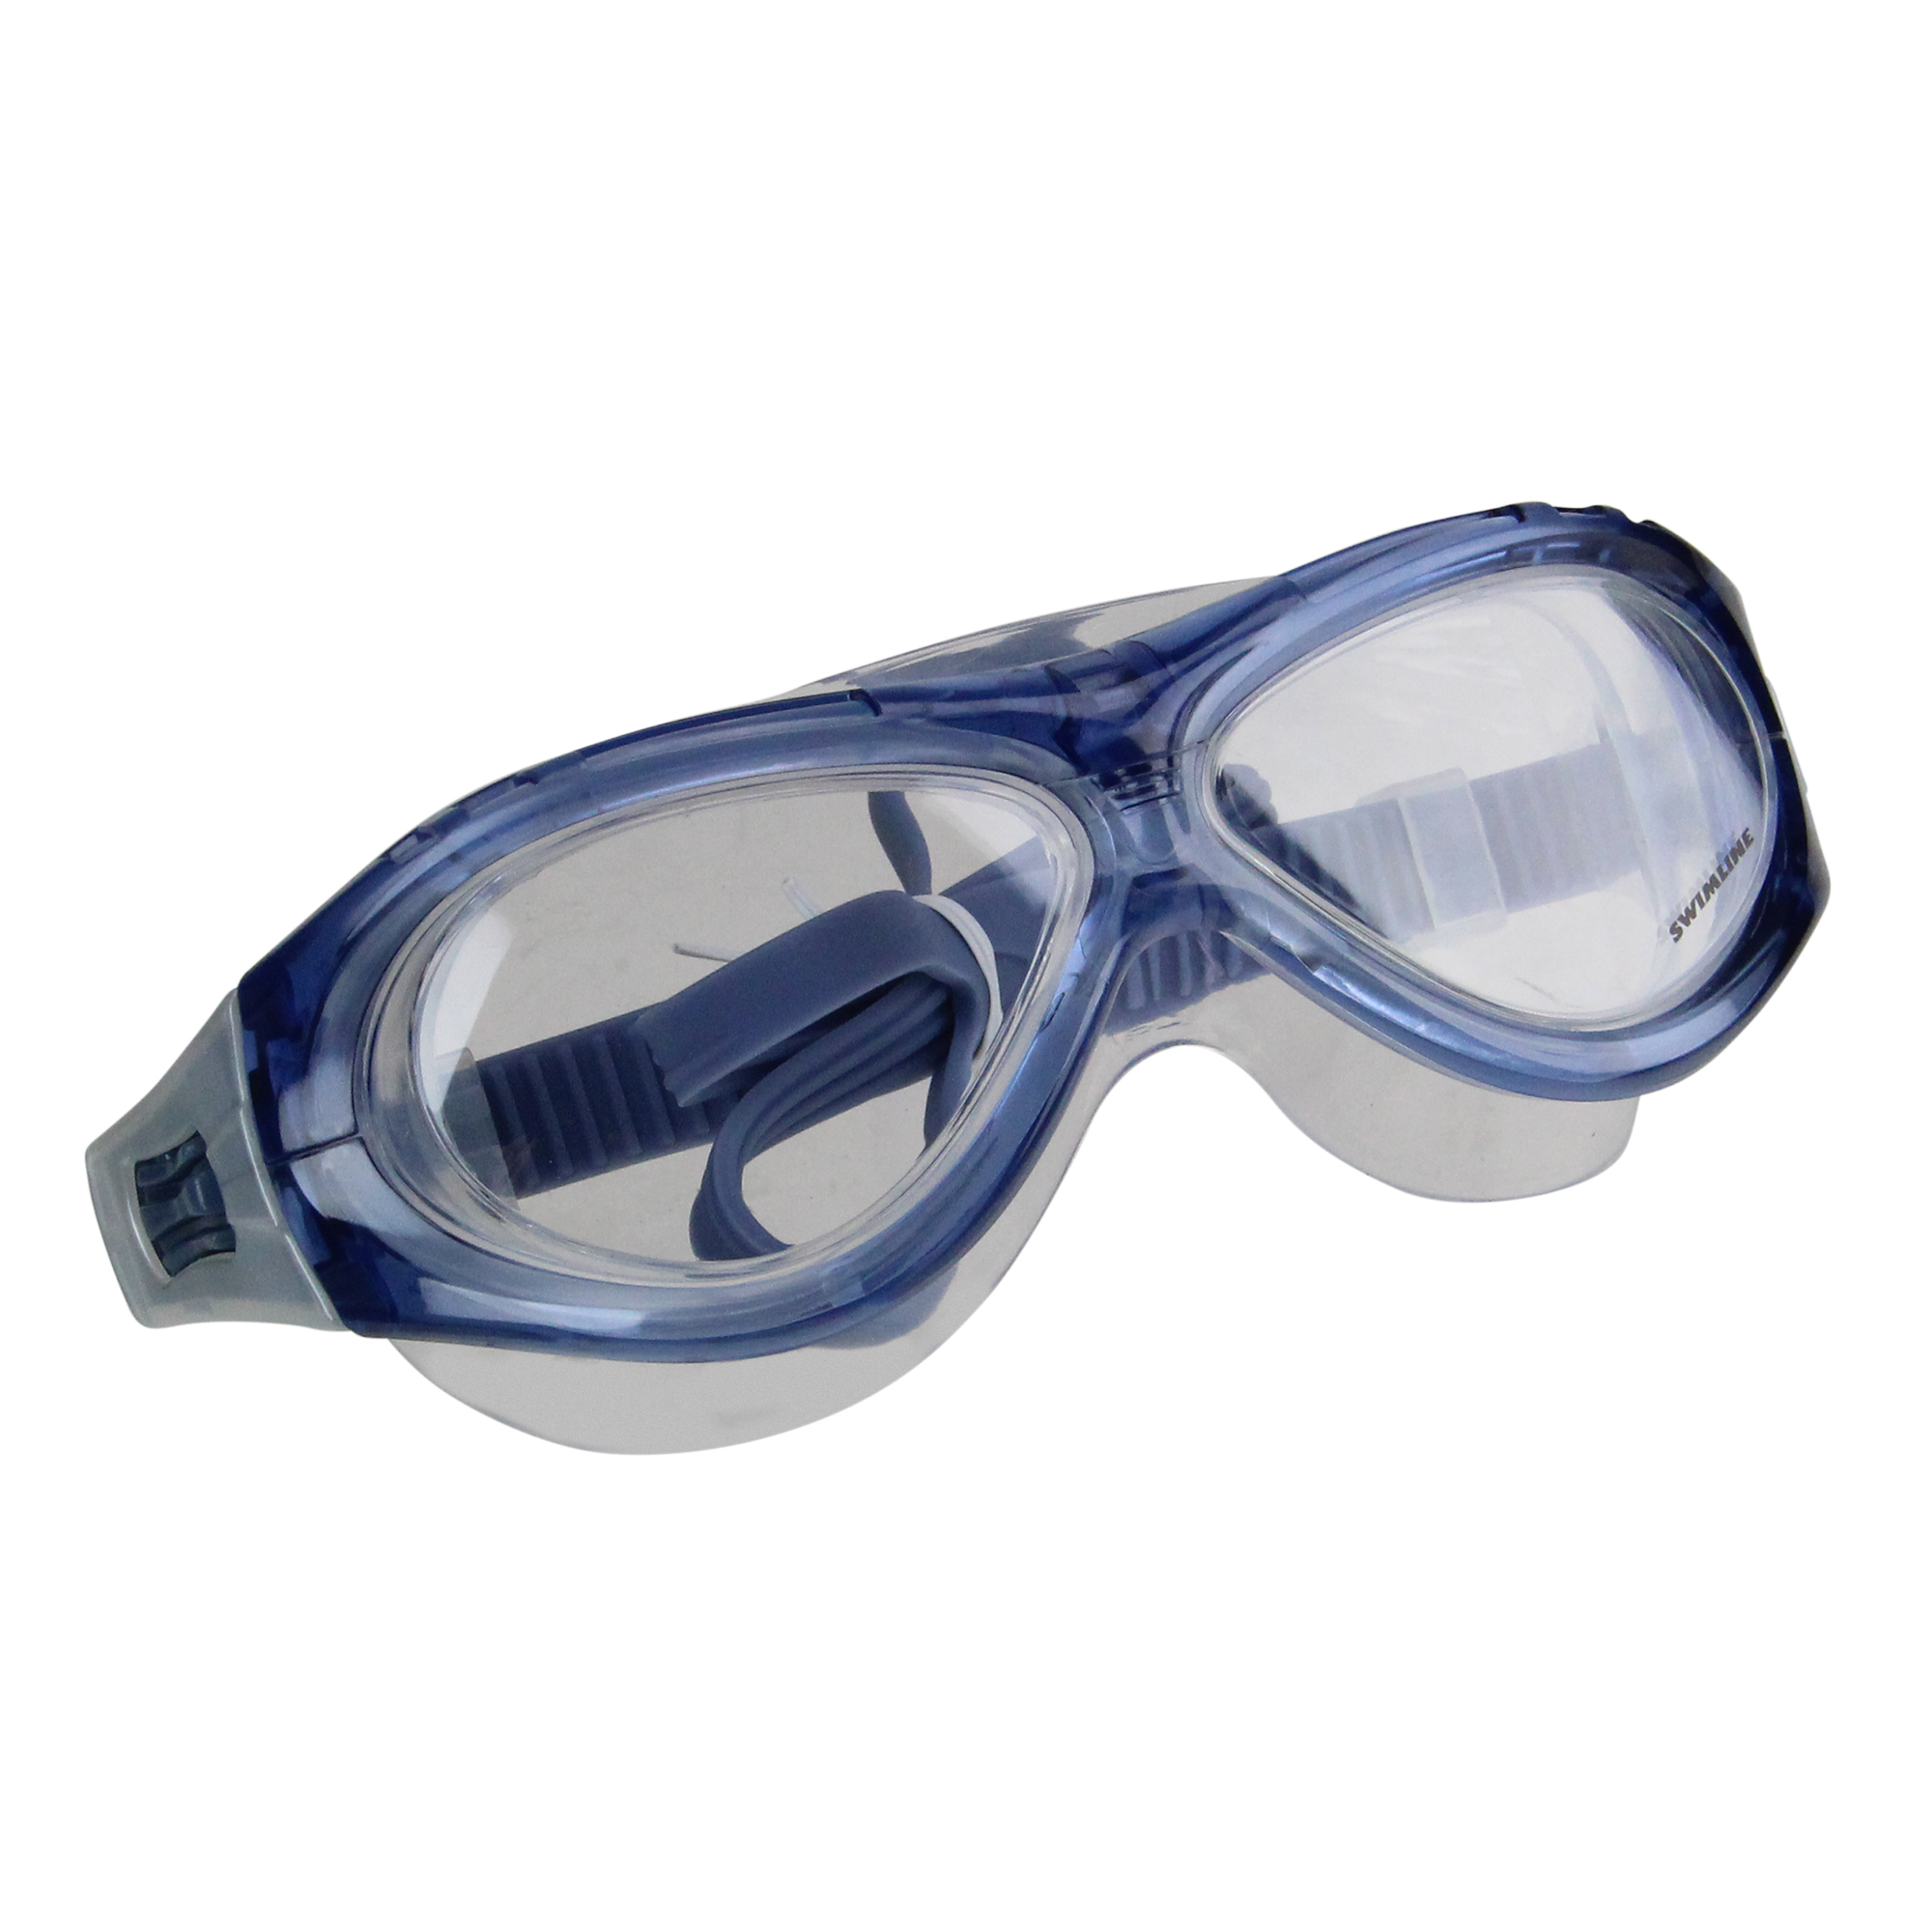 Swim Central 6.75" Blue Magnum Water Sports Swimming Pool Goggles